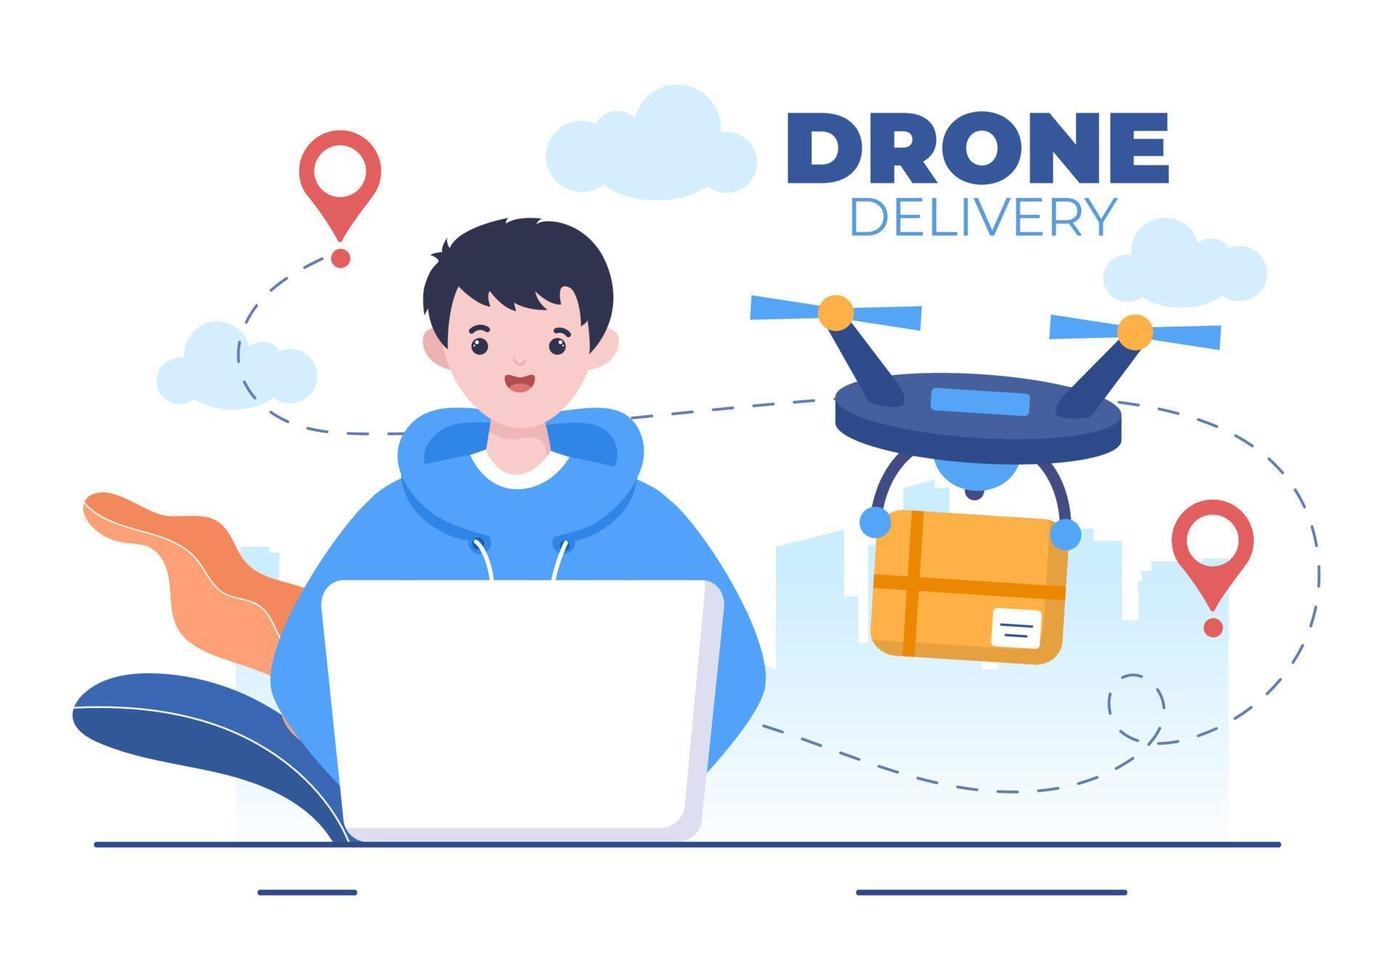 Delivery Service use Drone Background Vector Illustration. Employee Distributing Boxes using Modern Technology Device for Shipping Parcel Package